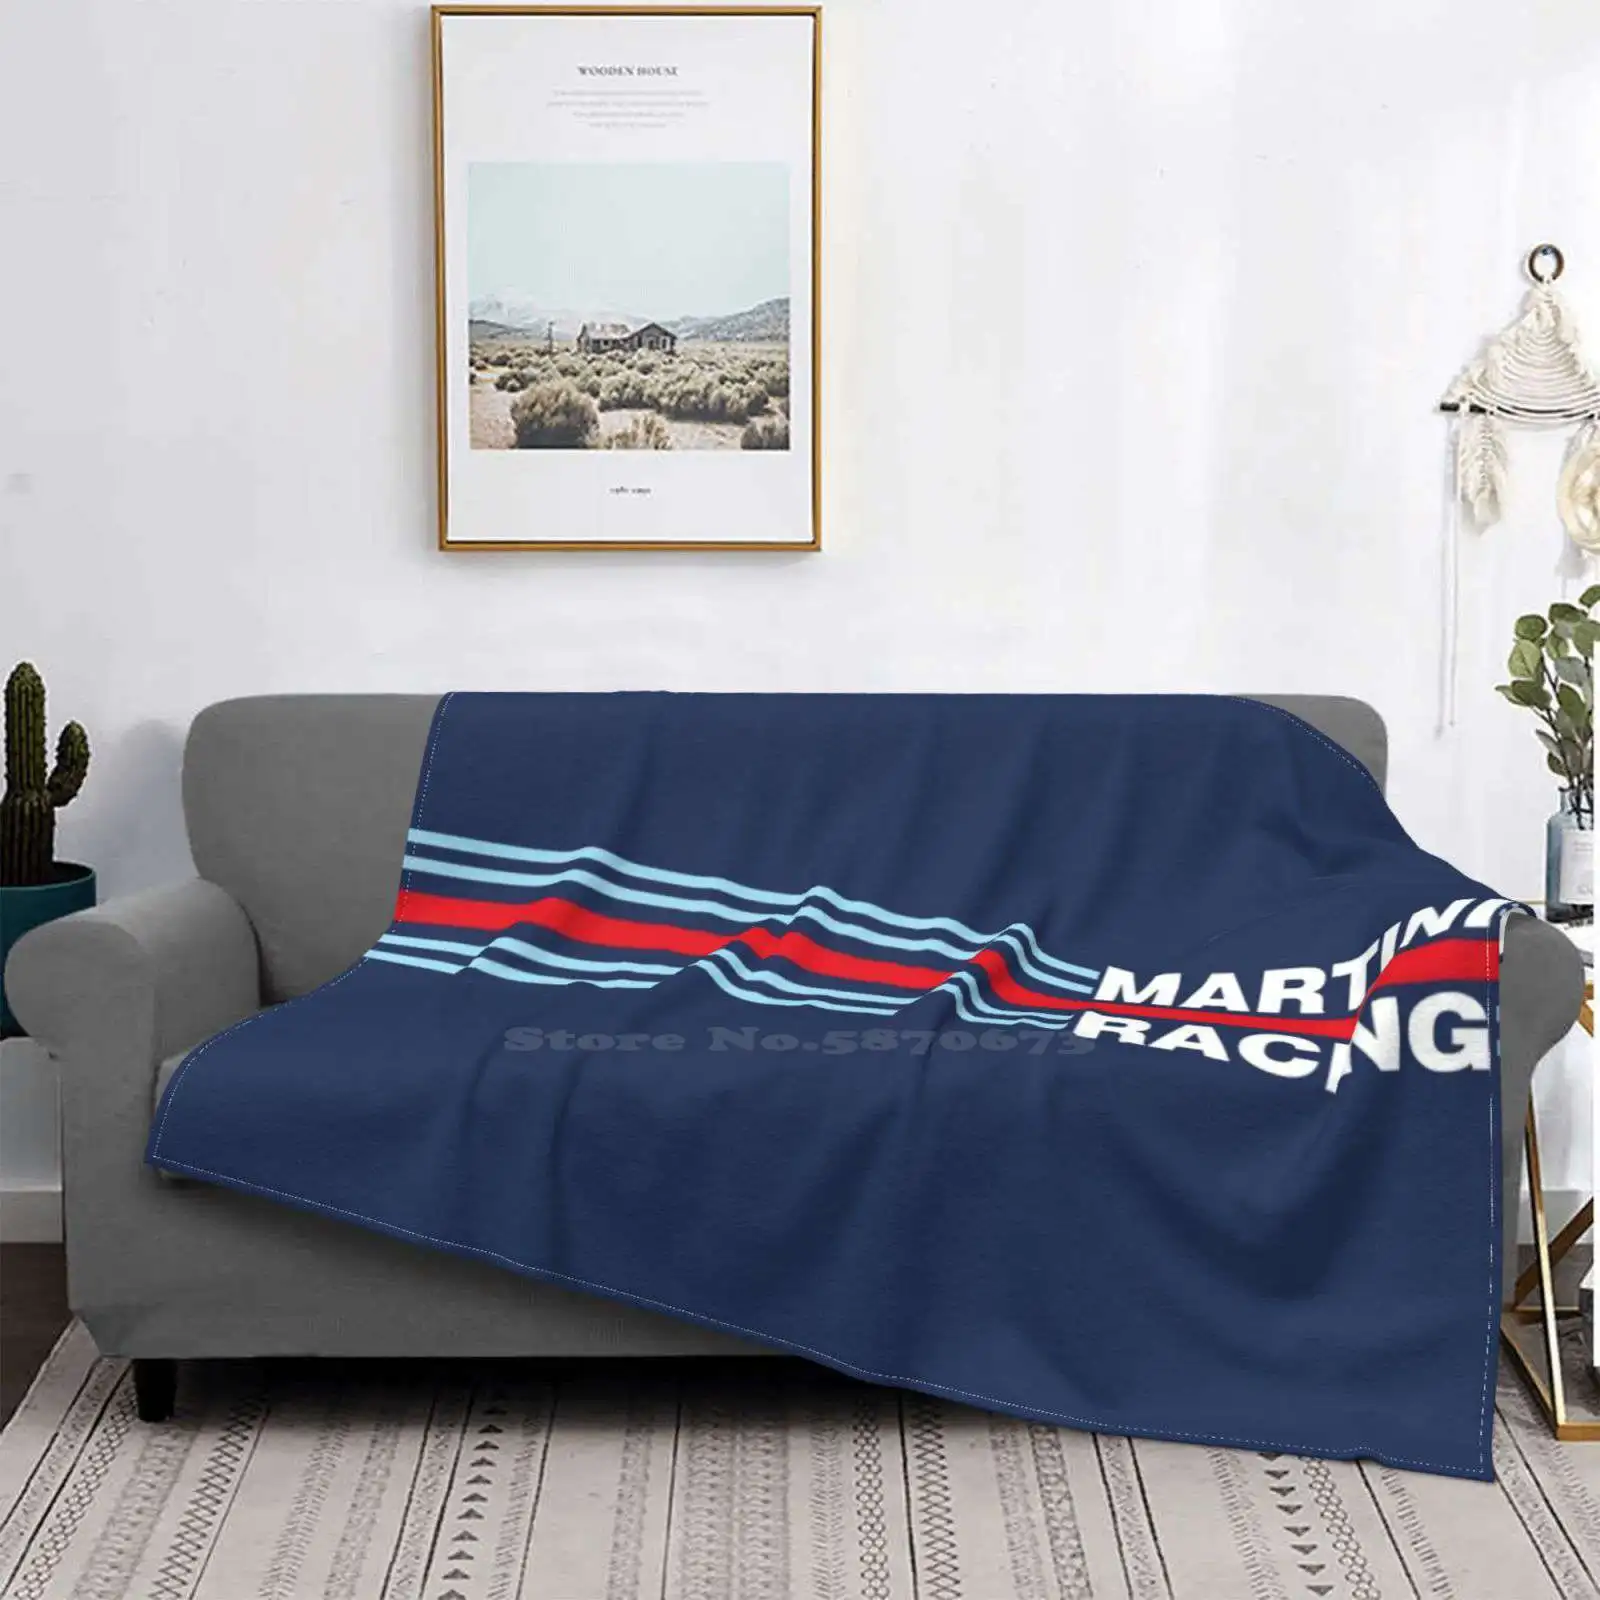 

I Racing Horizontal Stripe Hot Sale Printing High Qiality Flannel Blanket Lancia Delta Hf Integrate S4 Thema Stratos 037 Fiat